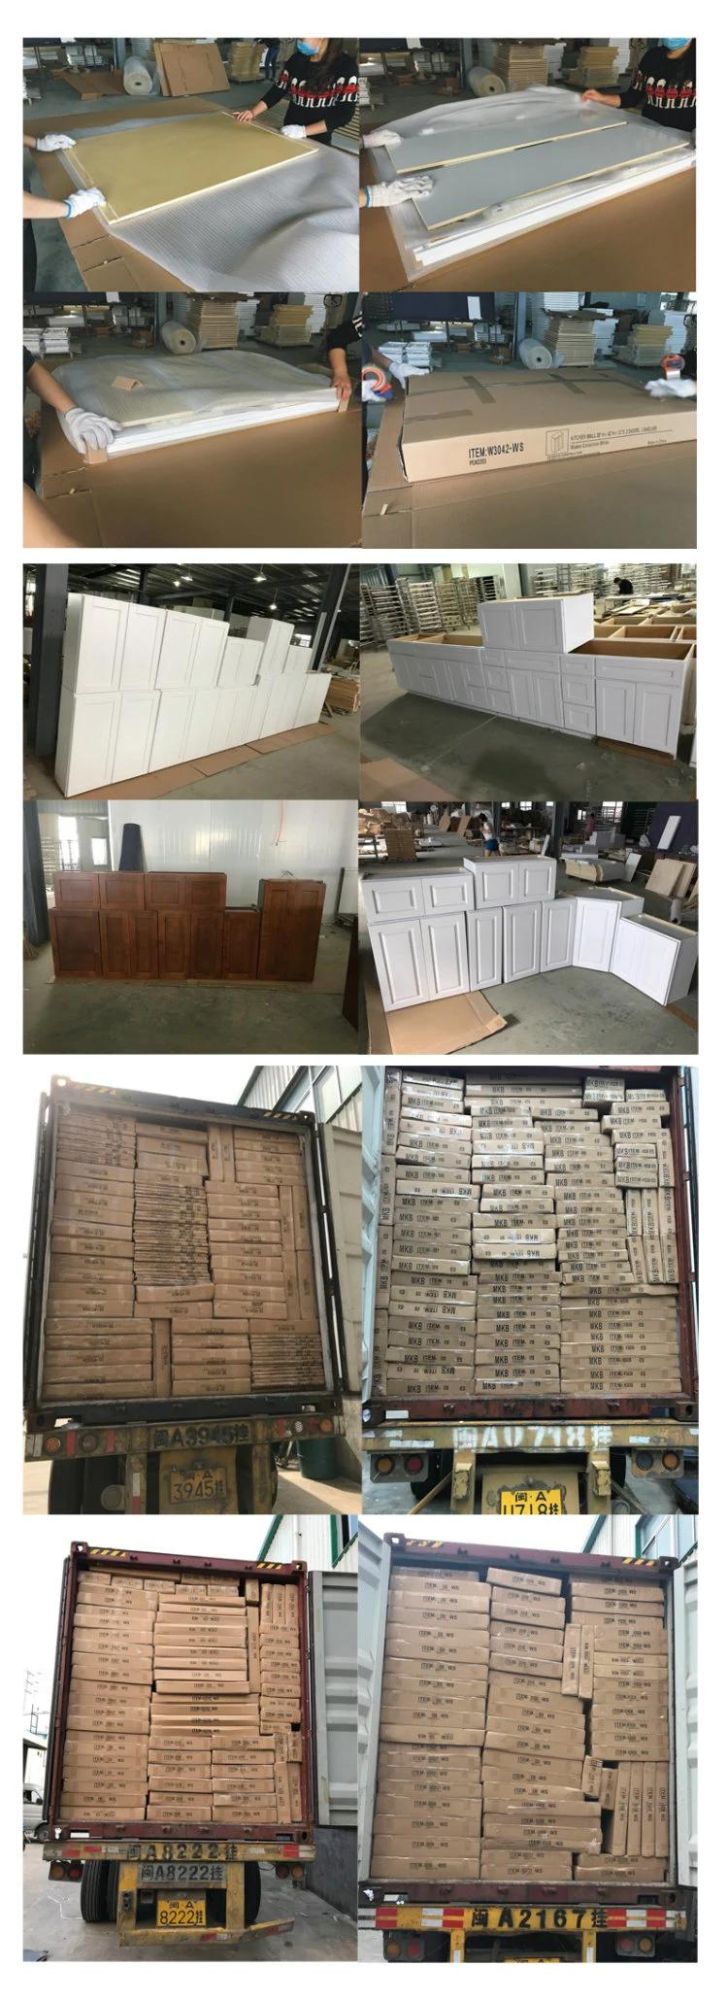 American Framed Wooden Kitchen Cabinets for Contrator USA